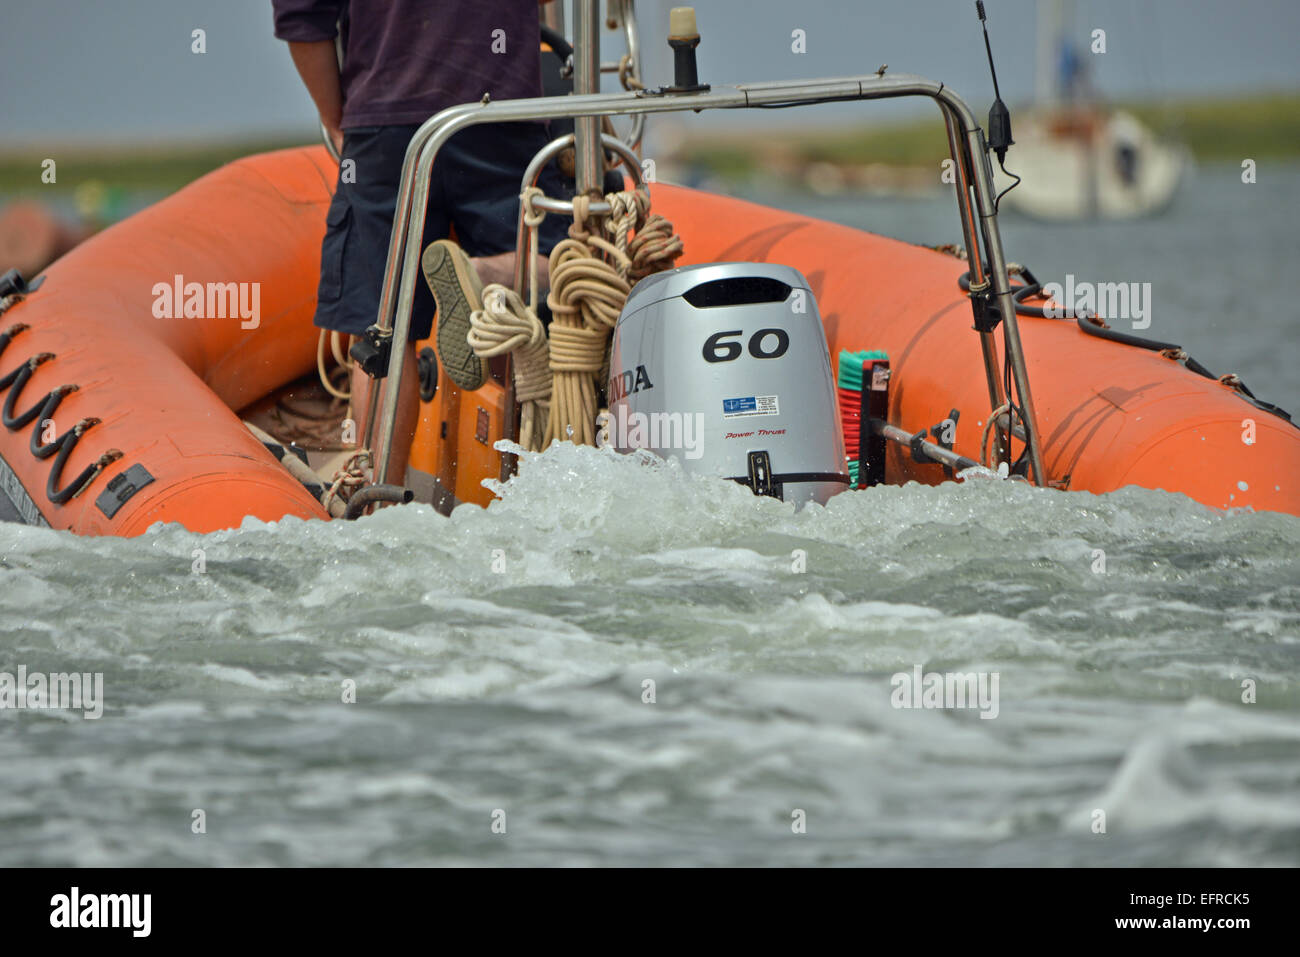 Submerged outboard motor on dingy Stock Photo